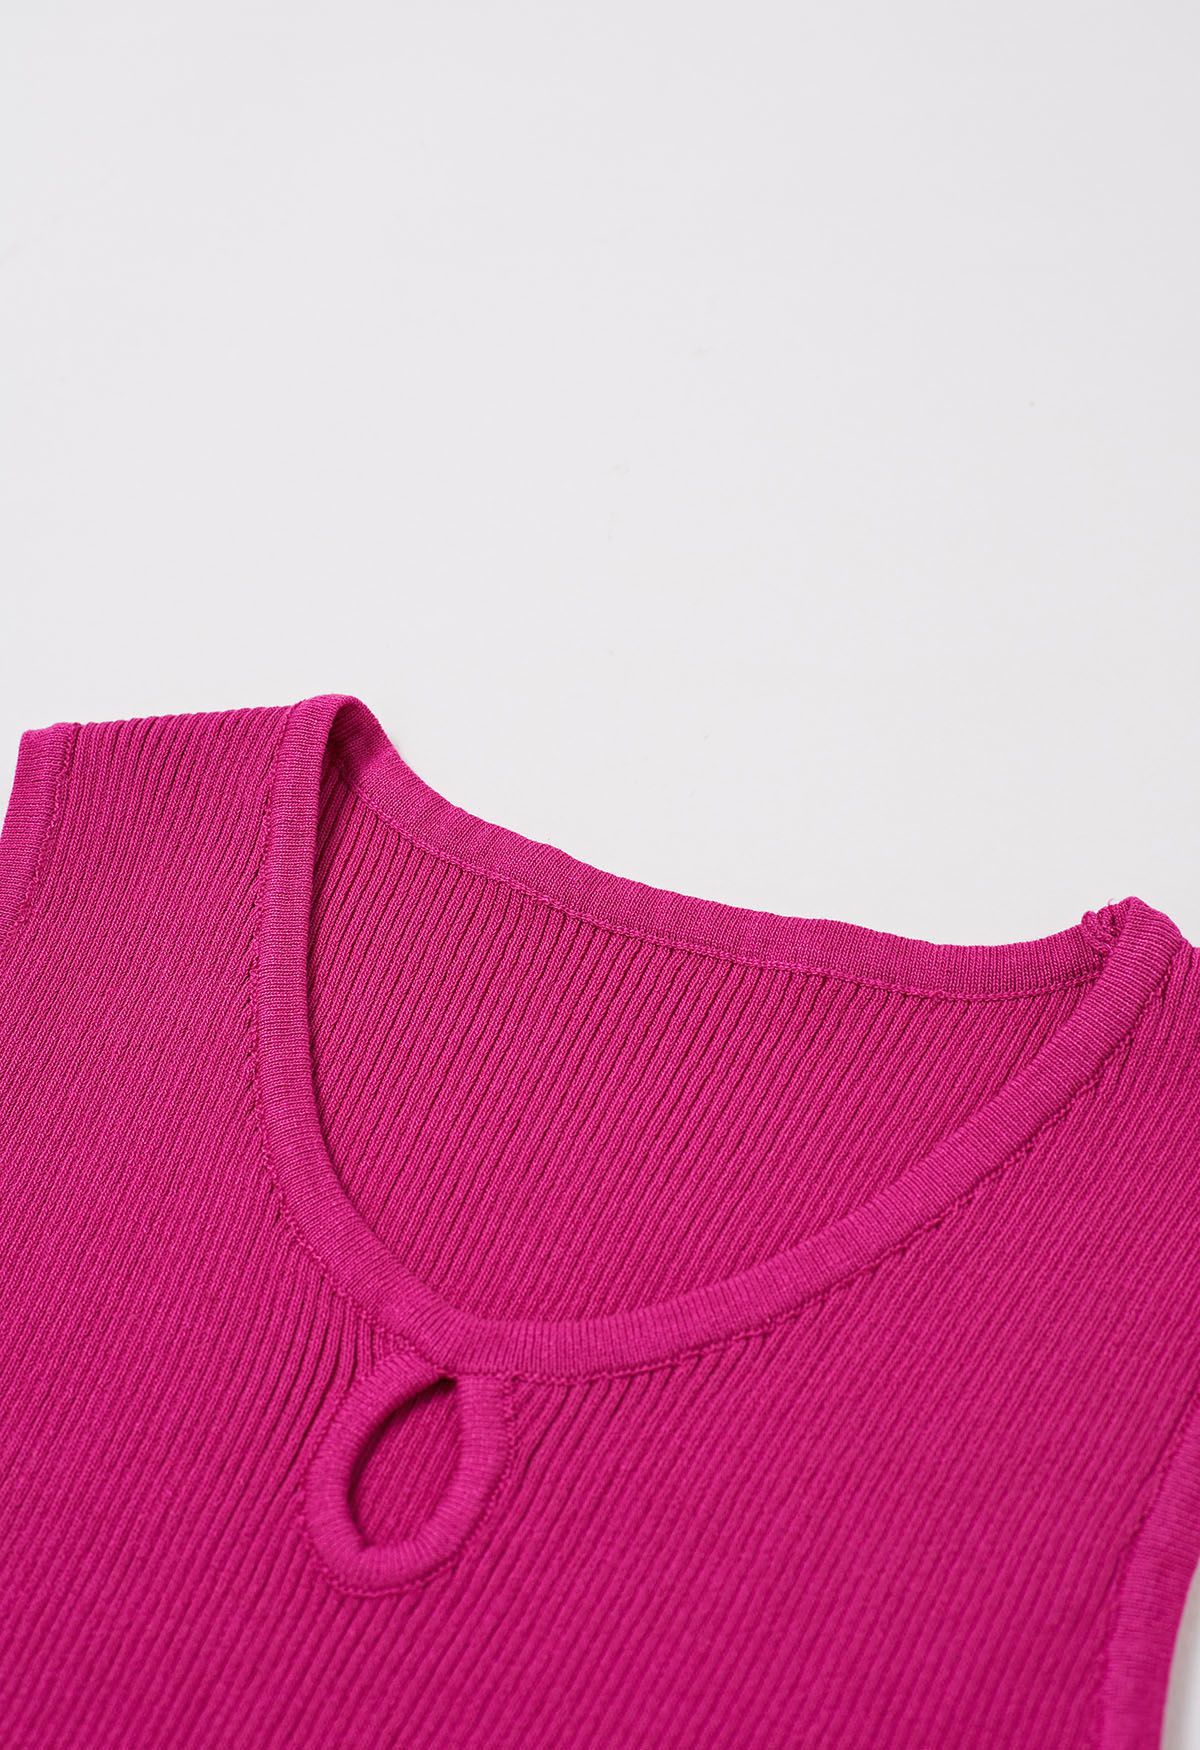 Cutout Detailing Sleeveless Knit Top in Hot Pink